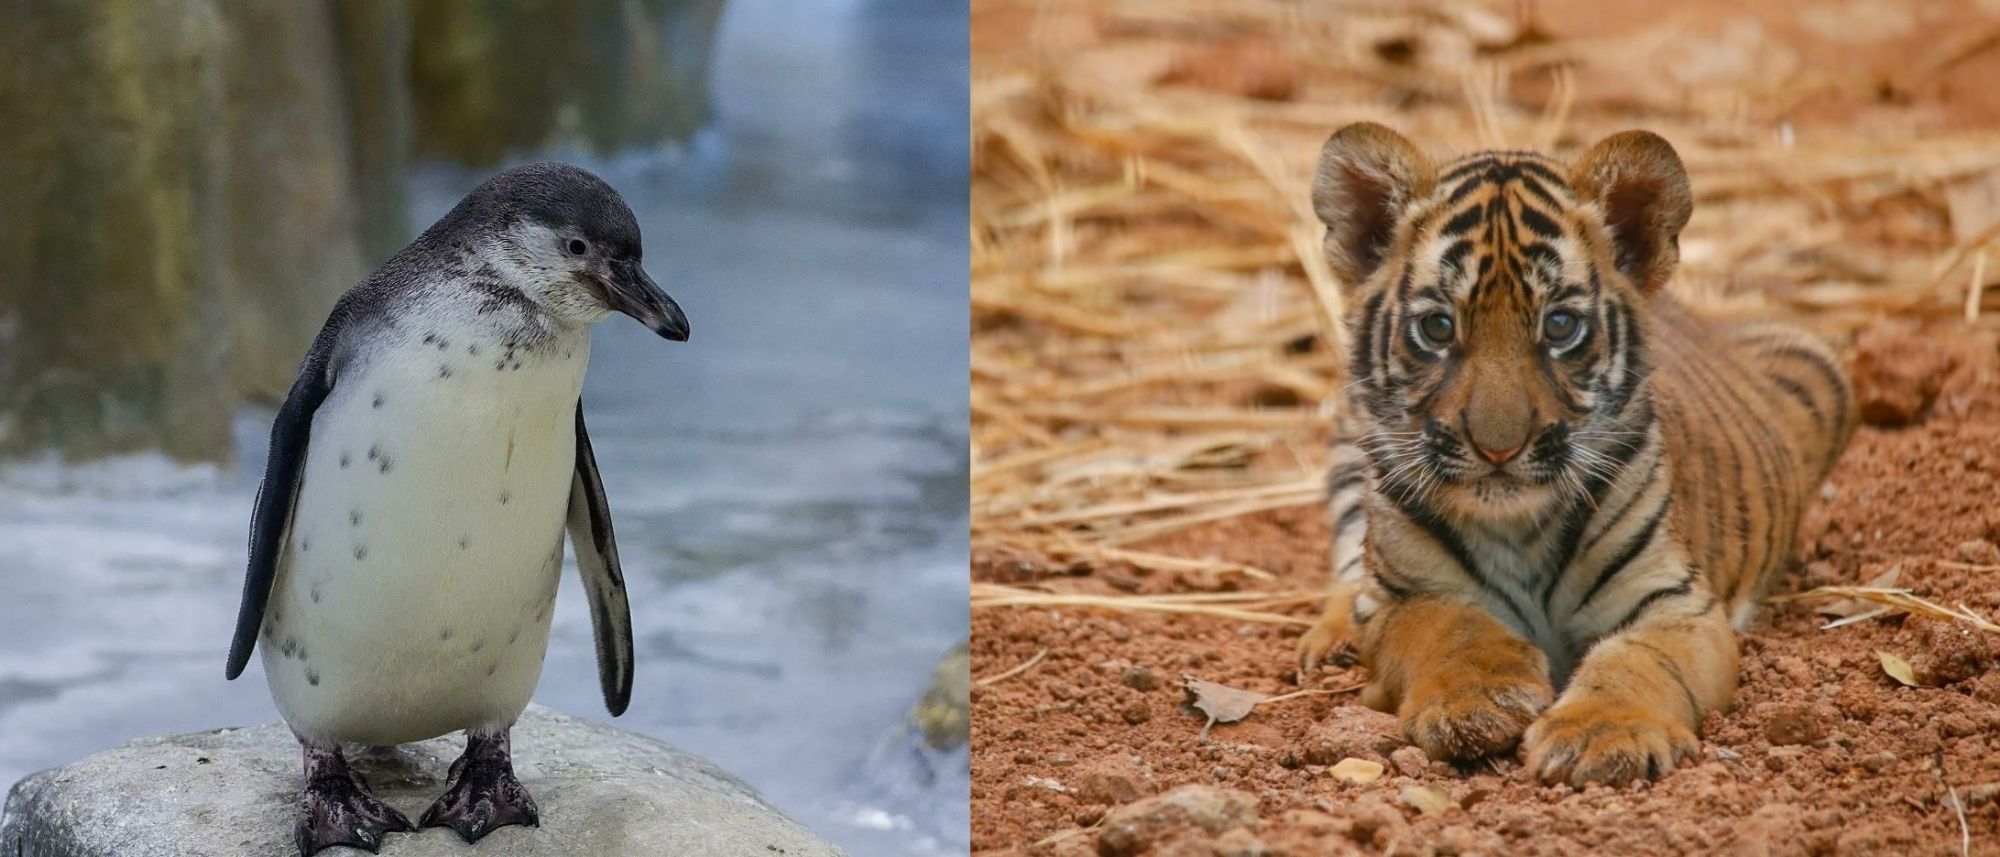 Mumbai Zoo Gets New Star Attractions, Welcomes Royal Bengal Tiger Cub & Humboldt Penguin Chick